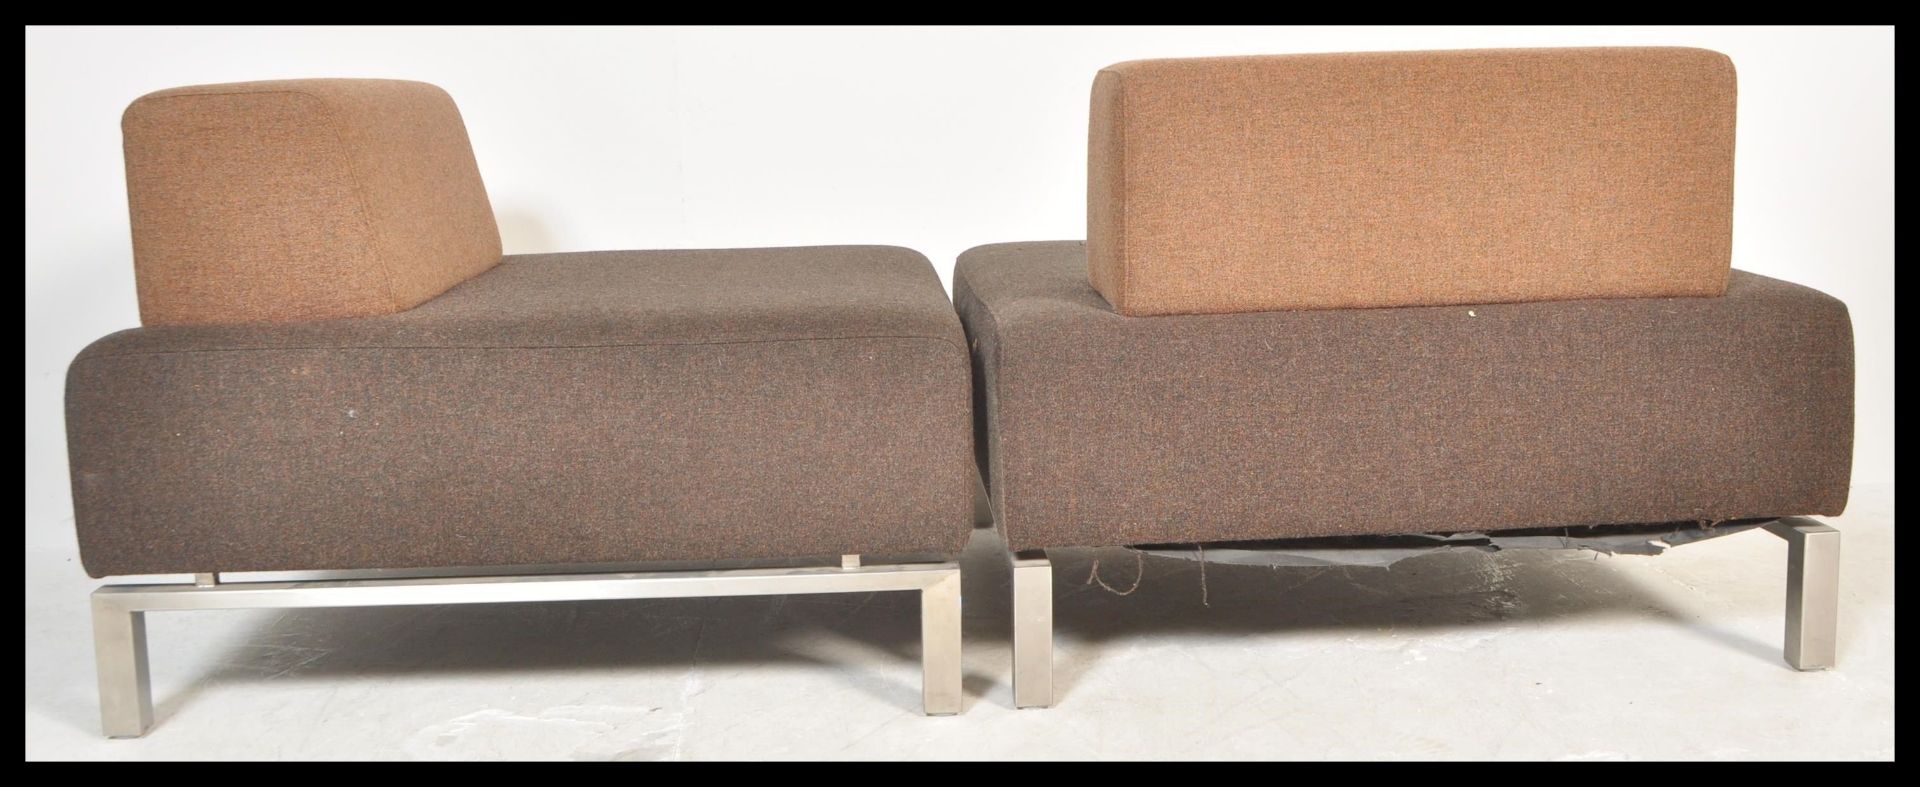 A pair of contemporary modern modular seating sofa / chairs in the manner of Orange Box furniture - Bild 5 aus 5